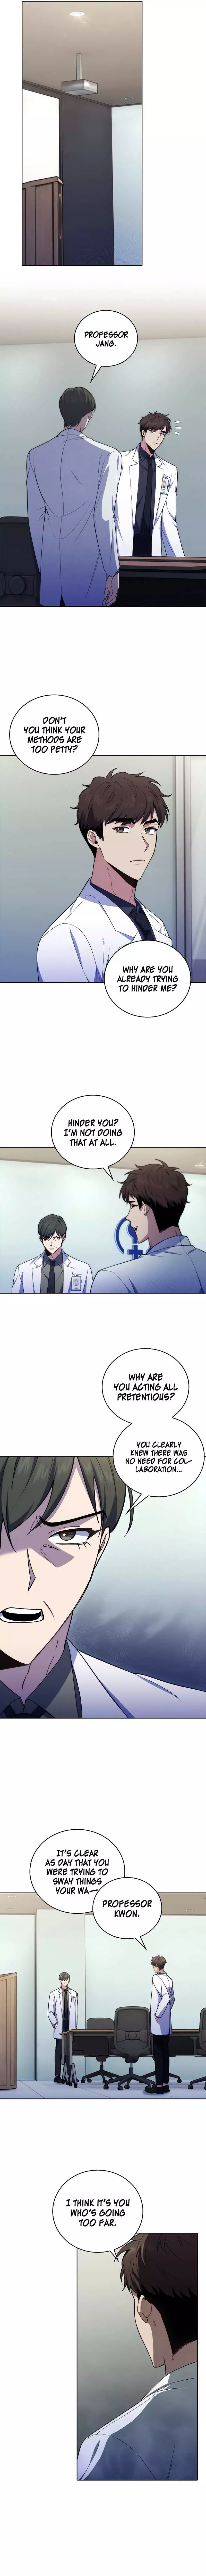 Level-Up Doctor (Manhwa) - 72 page 5-3820c8a6